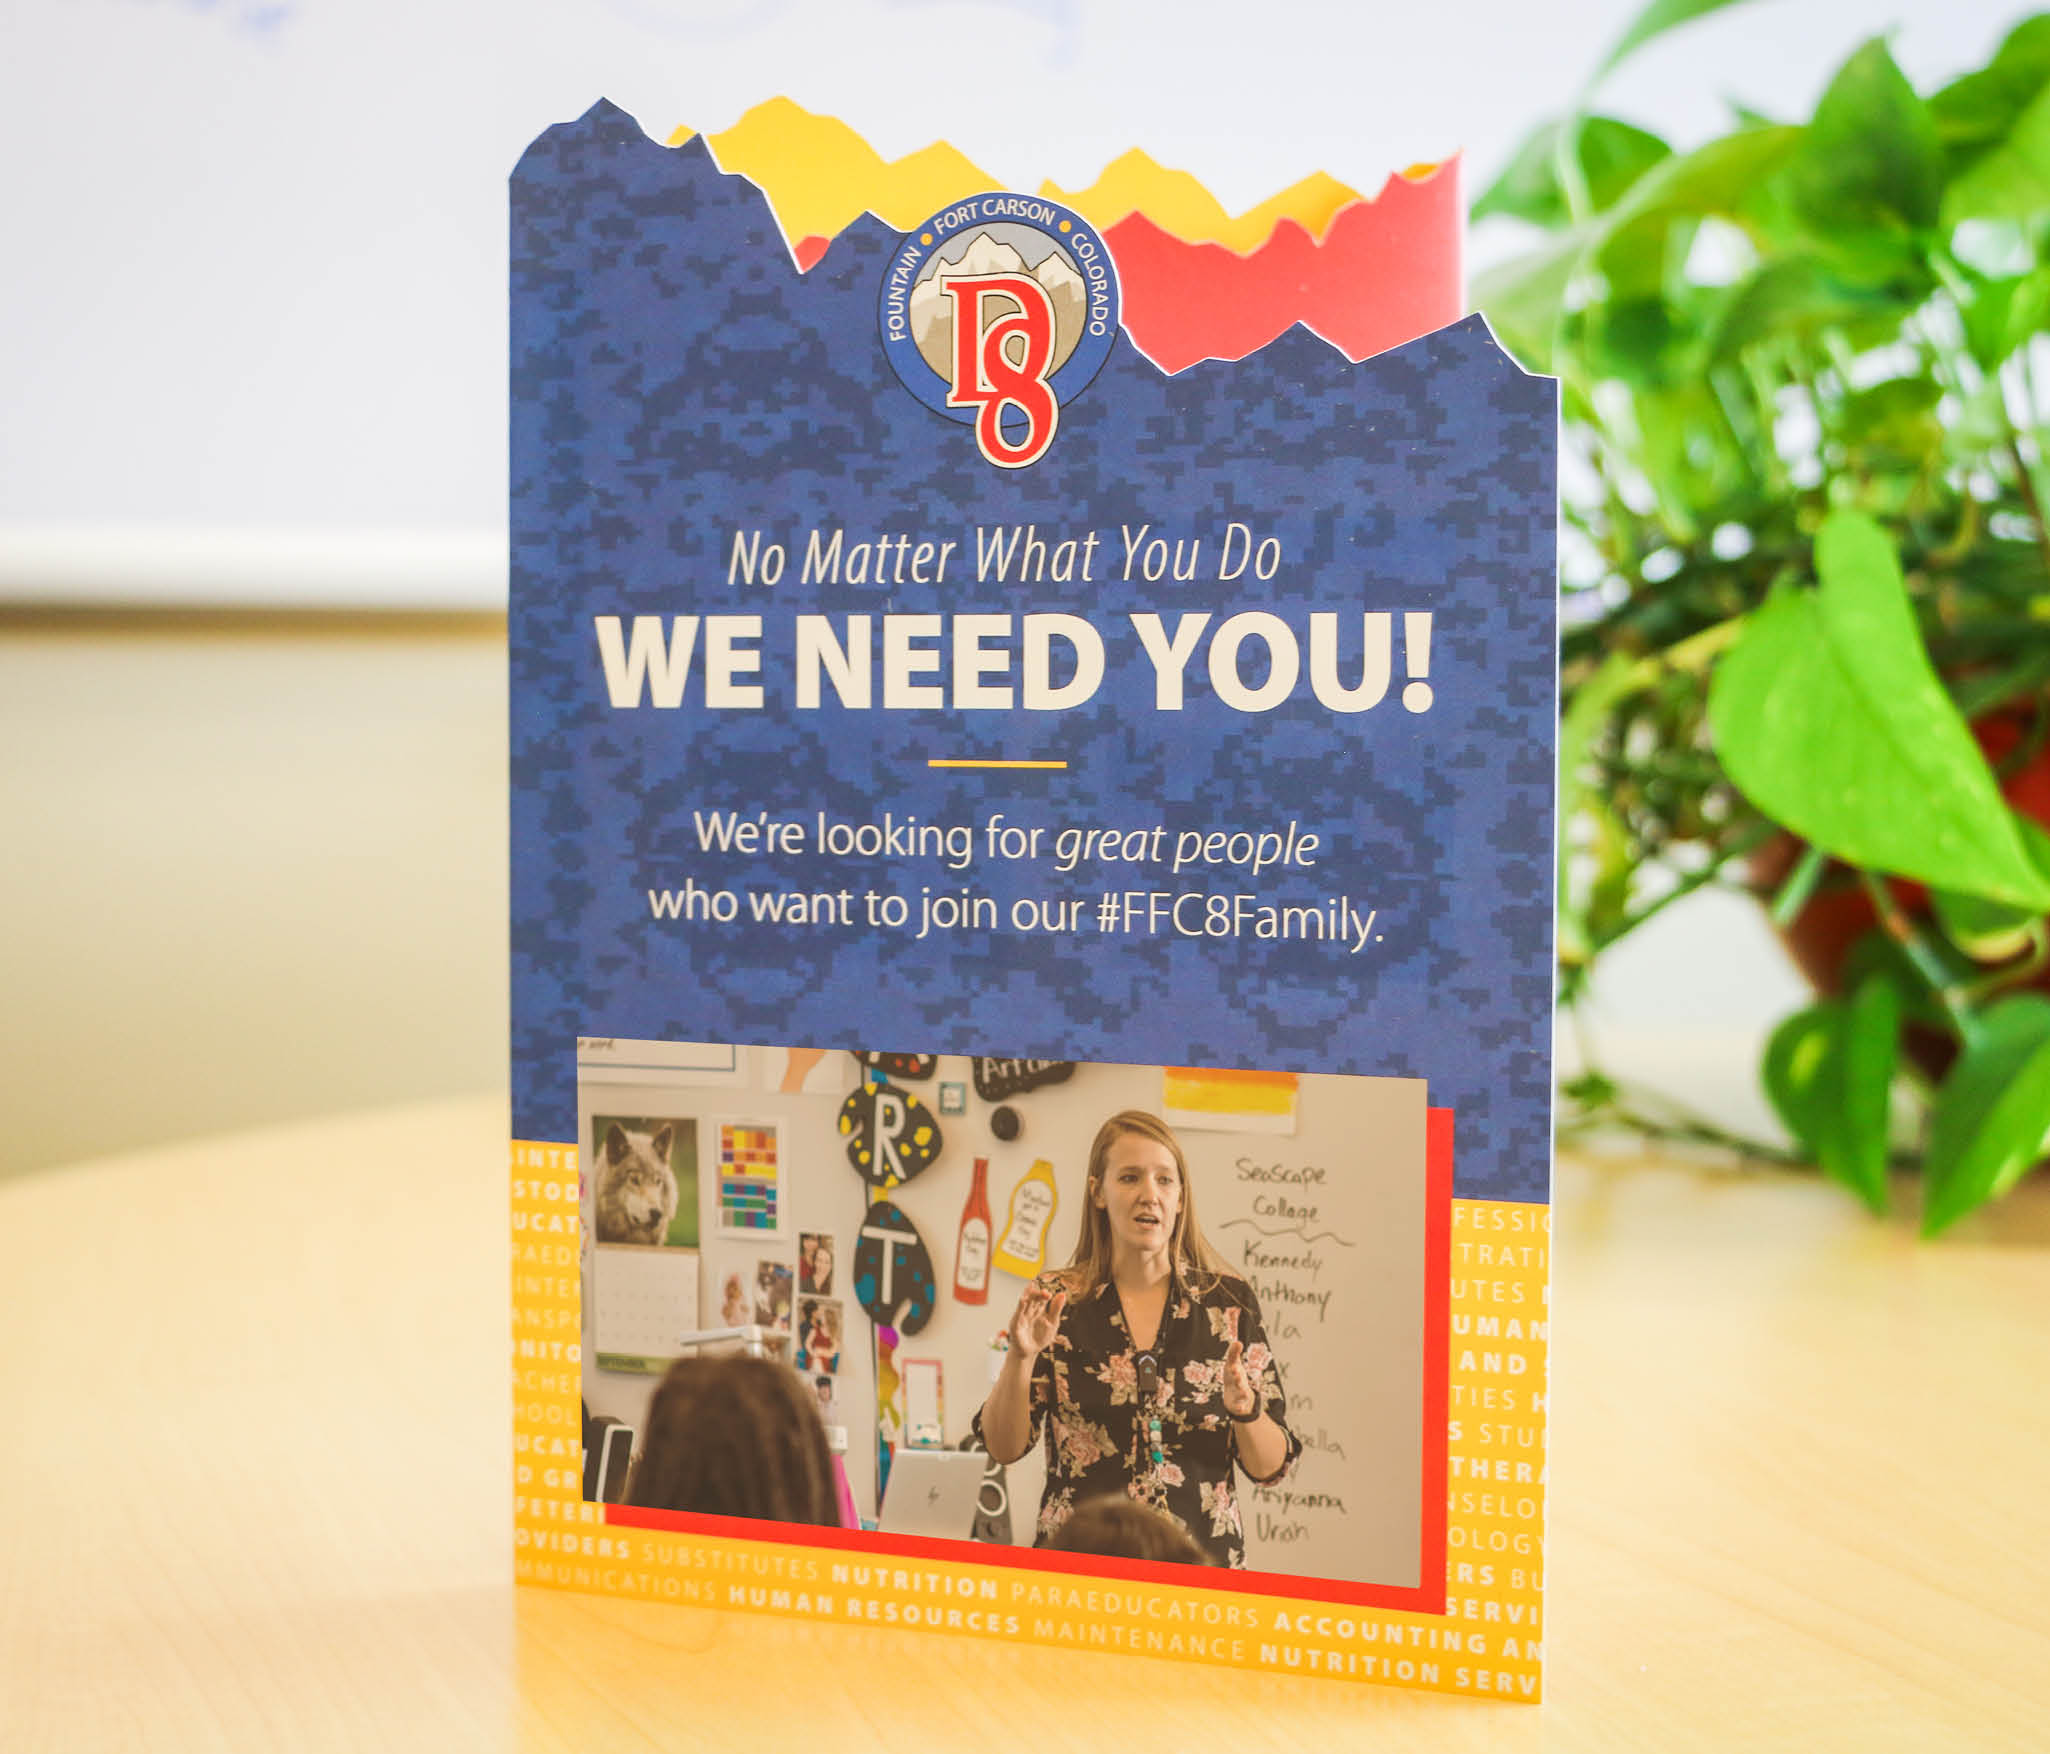 An employee recruitment brochure for Fountain-Fort Carson School District 8 reading "No Matter What You Do, WE NEED YOU!"